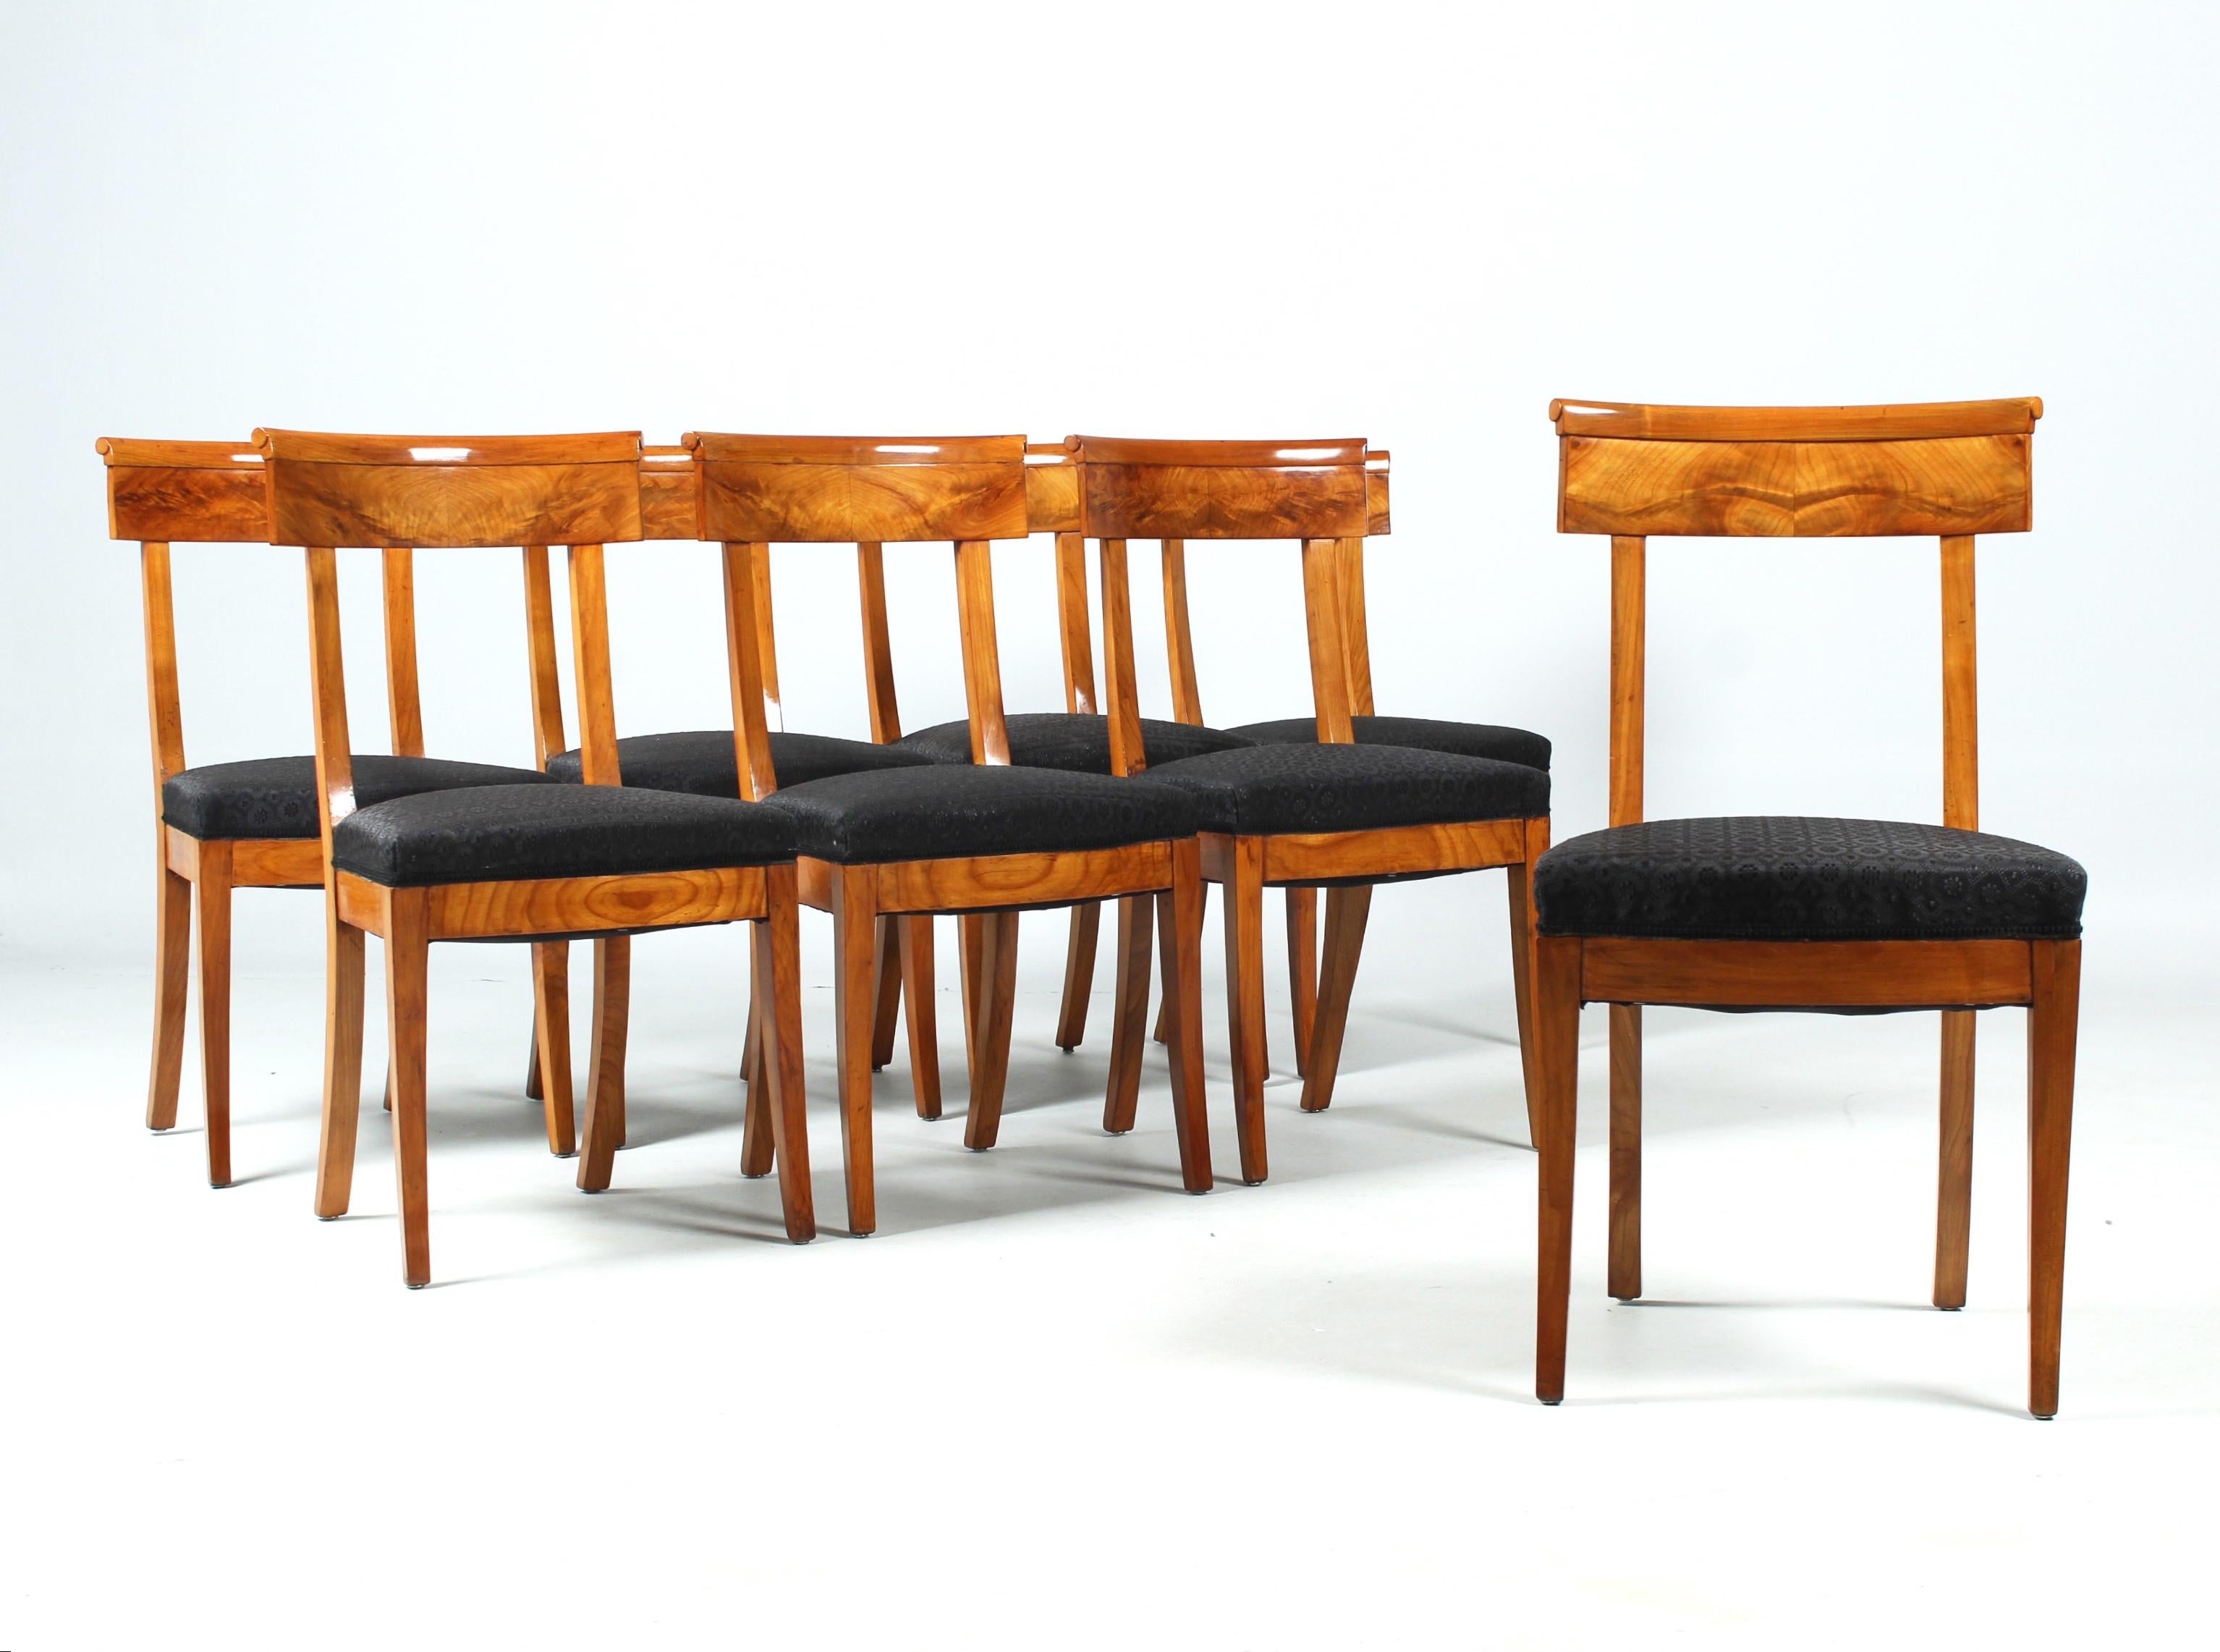 Eight identical antique Biedermeier chairs in cherry wood
West Germany / France
Cherry tree
Biedermeier around 1820

Dimensions: H x W x D: 88 x 46 x 47 cm Seat height: 47 cm

Description:
Beautiful and authentic set of eight identical